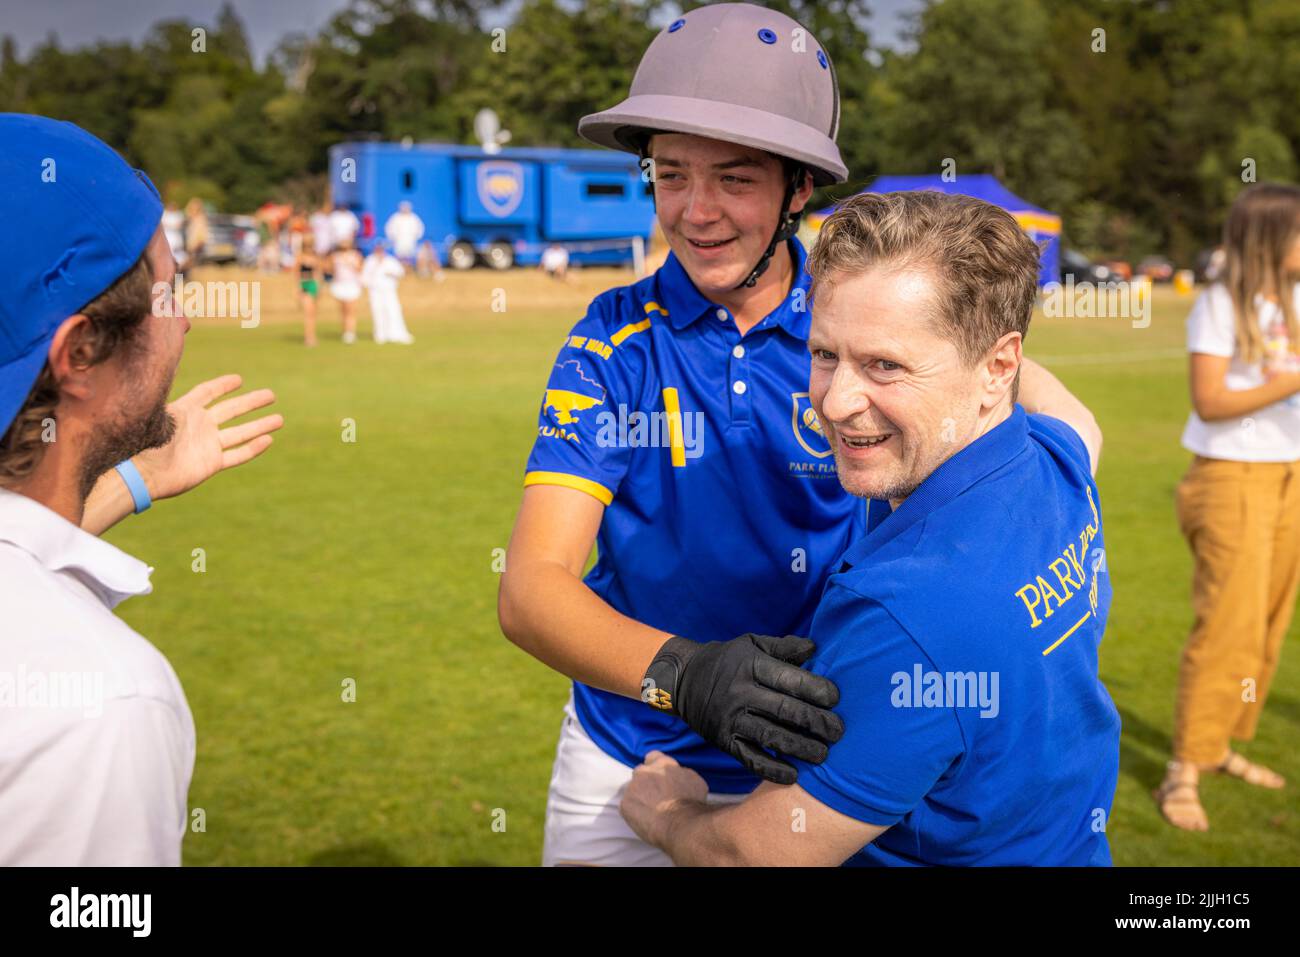 Russian banker Andrey Borodin (right) embracing Josh Hyde at the Gold Cup final at Cowdray Park Polo Club where his team, Park Place, beat Dubai in a Stock Photo